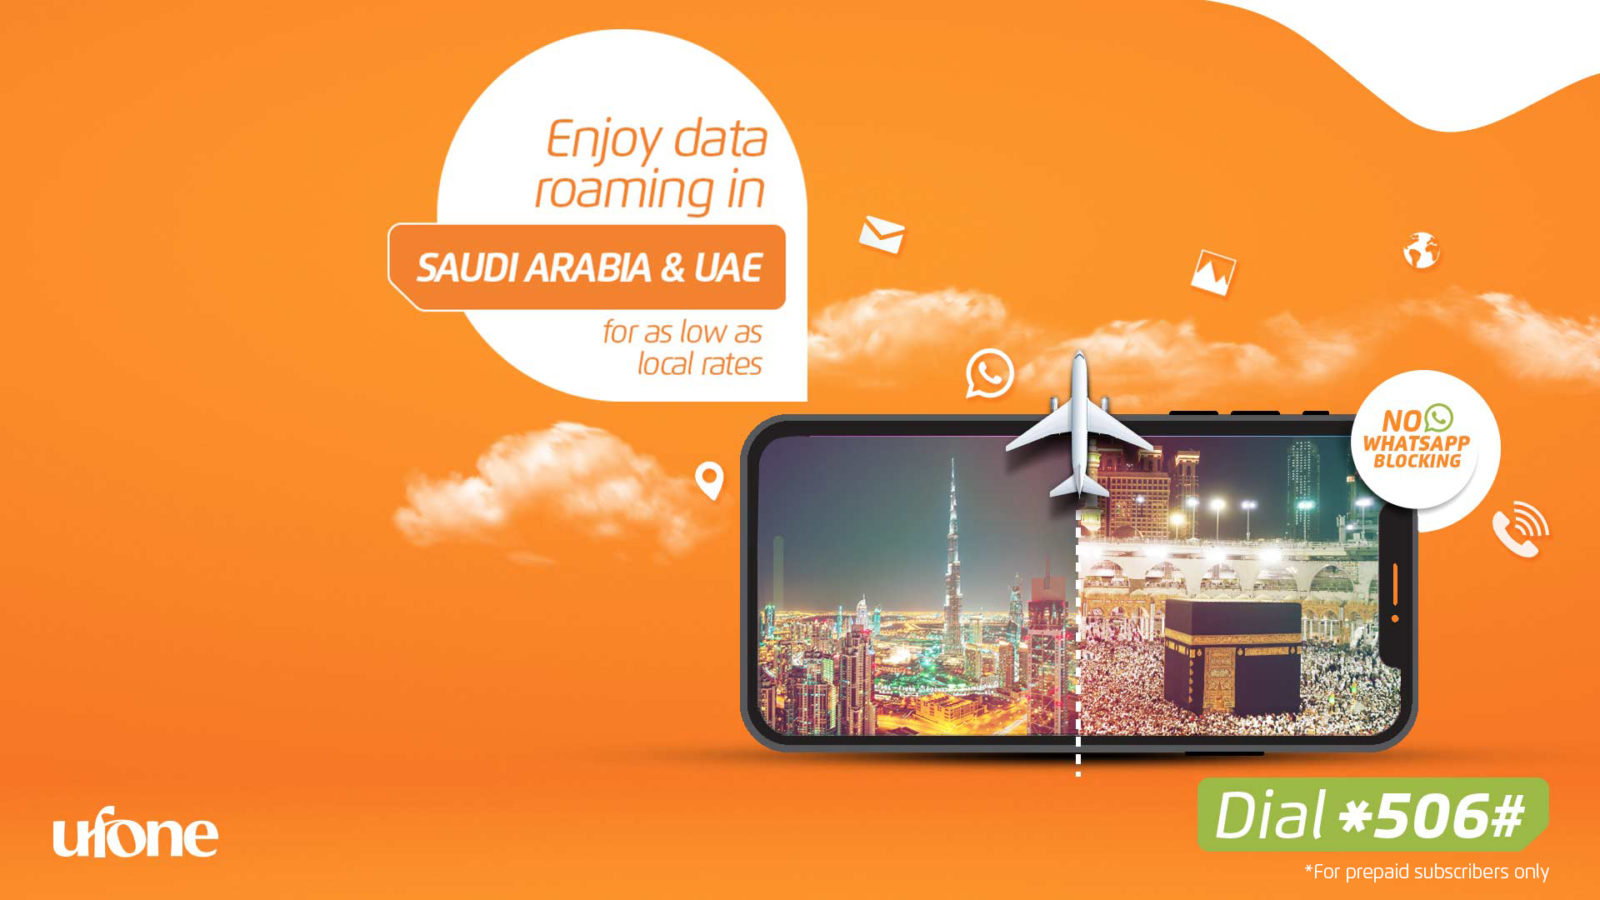 Ufone Offers Affordable Data Packages &amp;amp; Whatsapp Access serapportantà Mobily Postpaid 3 Sim Packages 